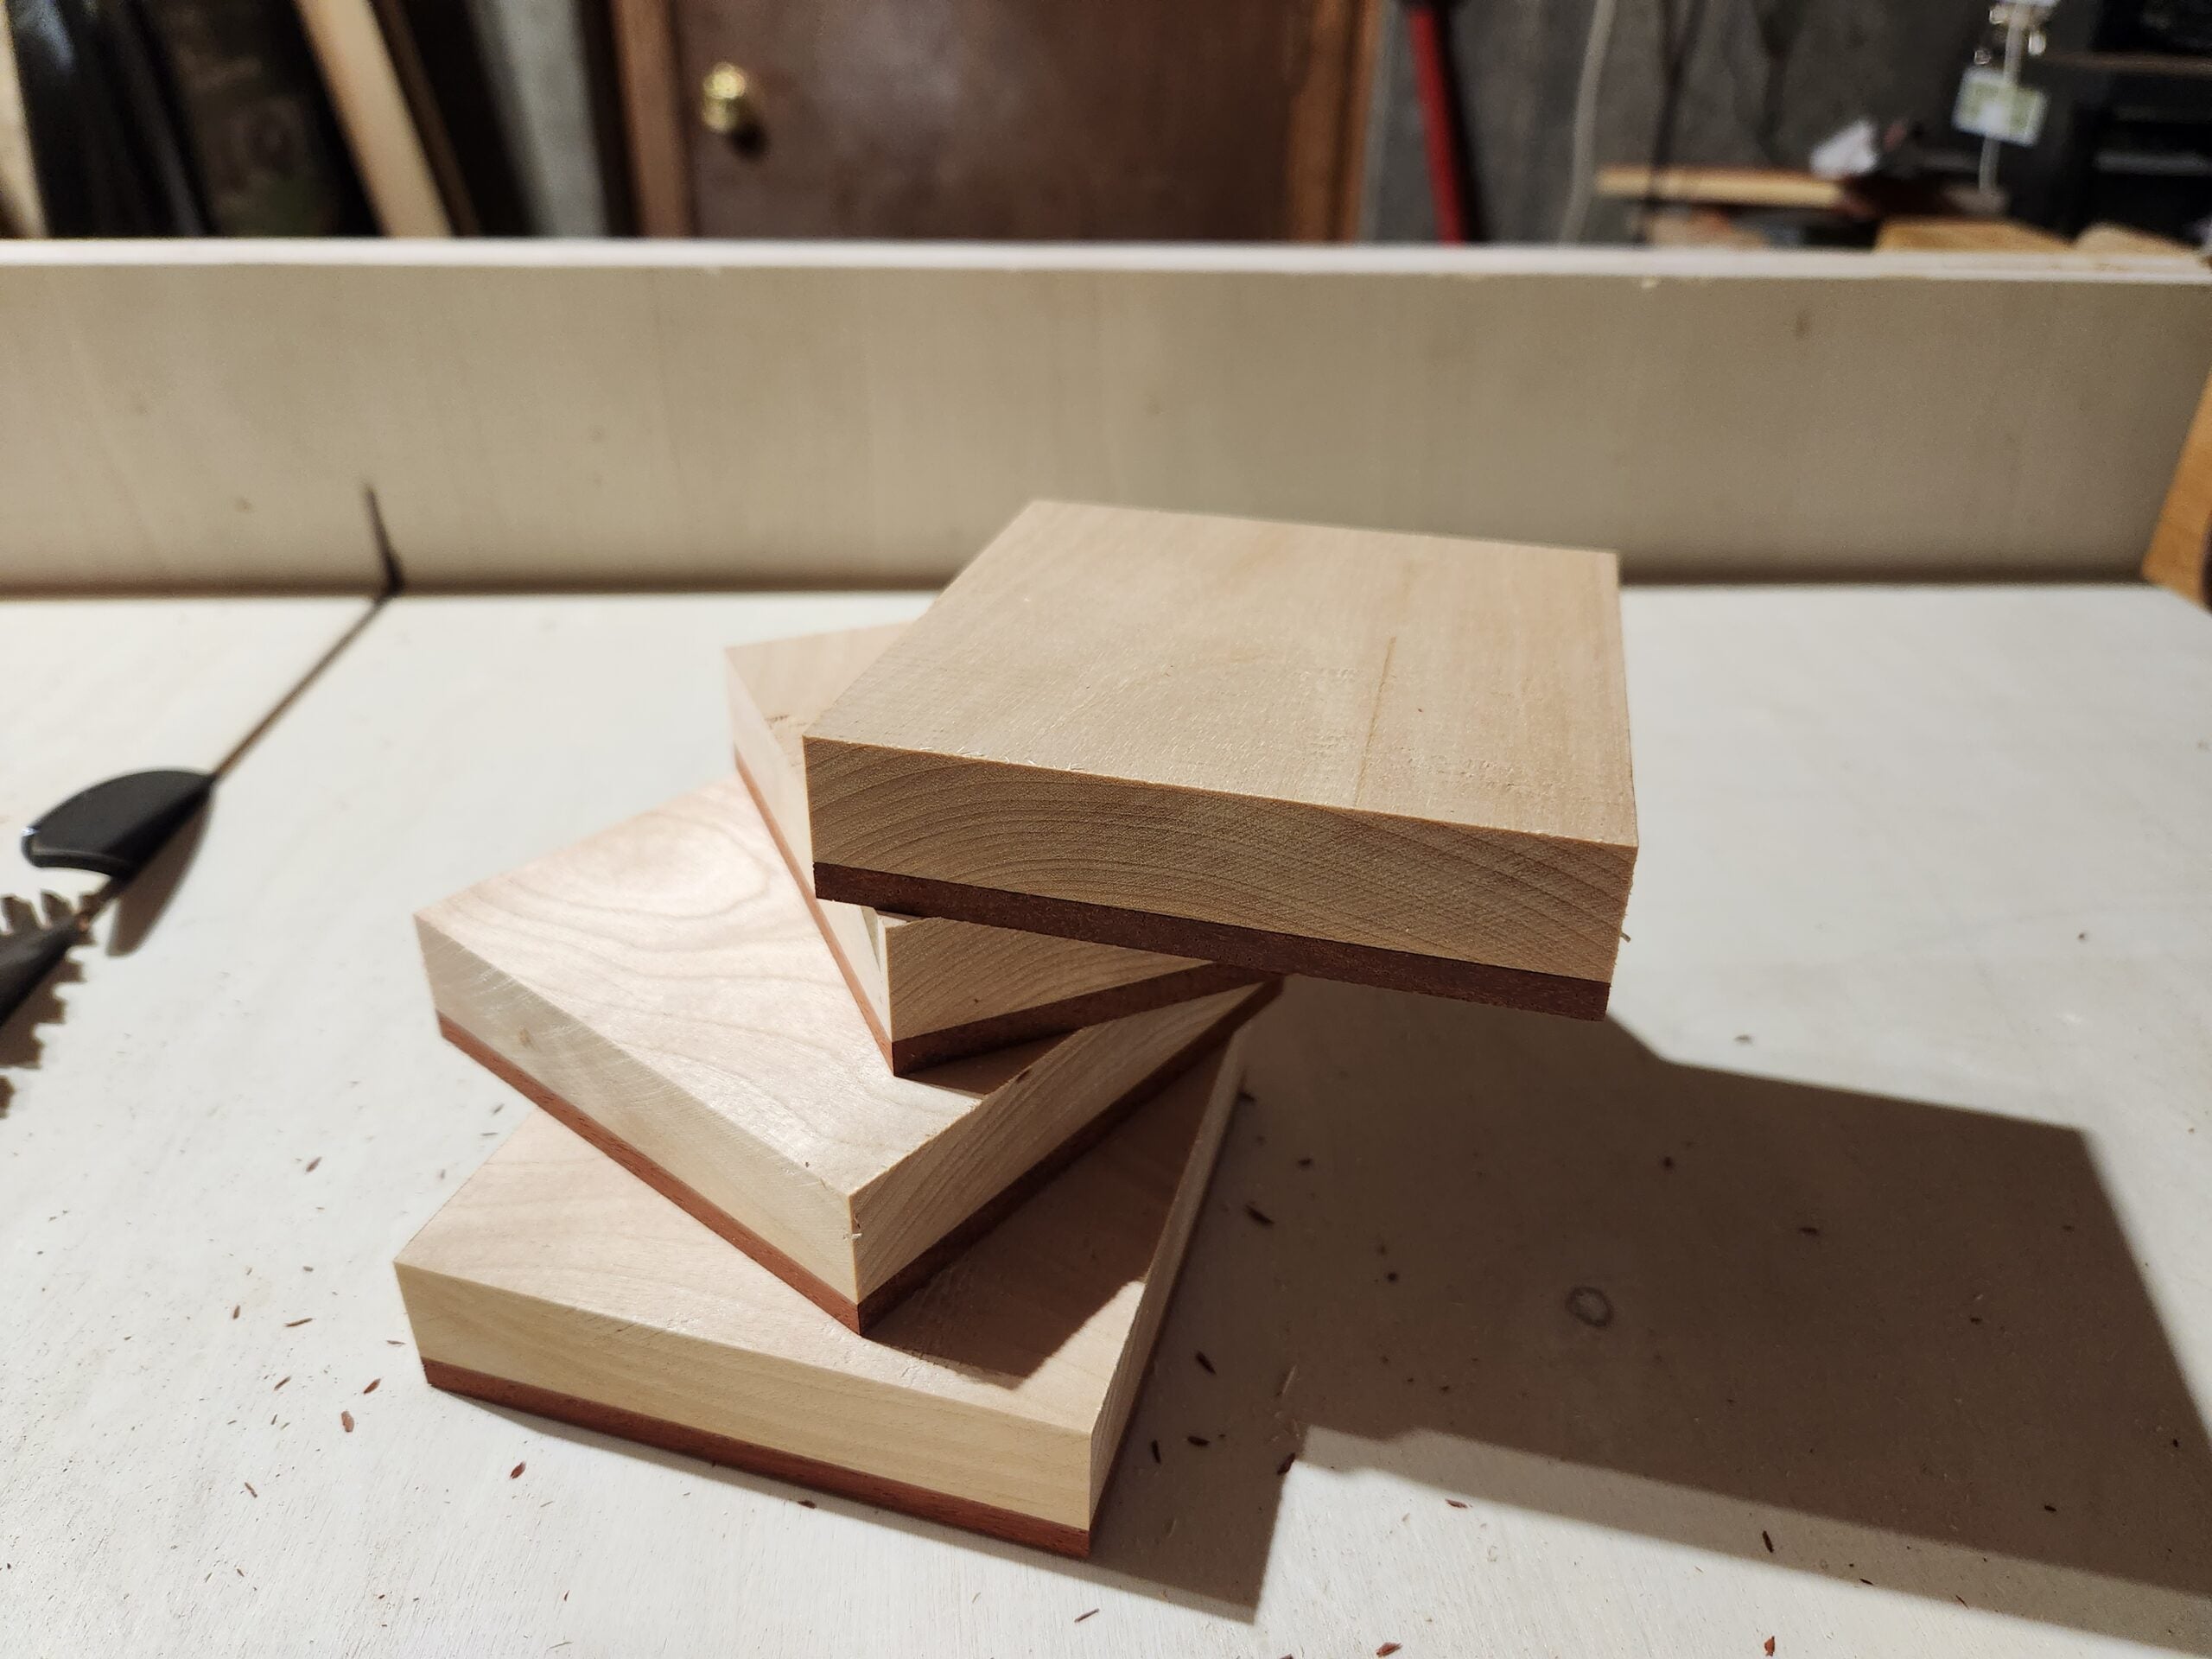 A stack of four pieces of laminated wood made out of one layer of maple and a thinner layer of padauk, on a table saw table.